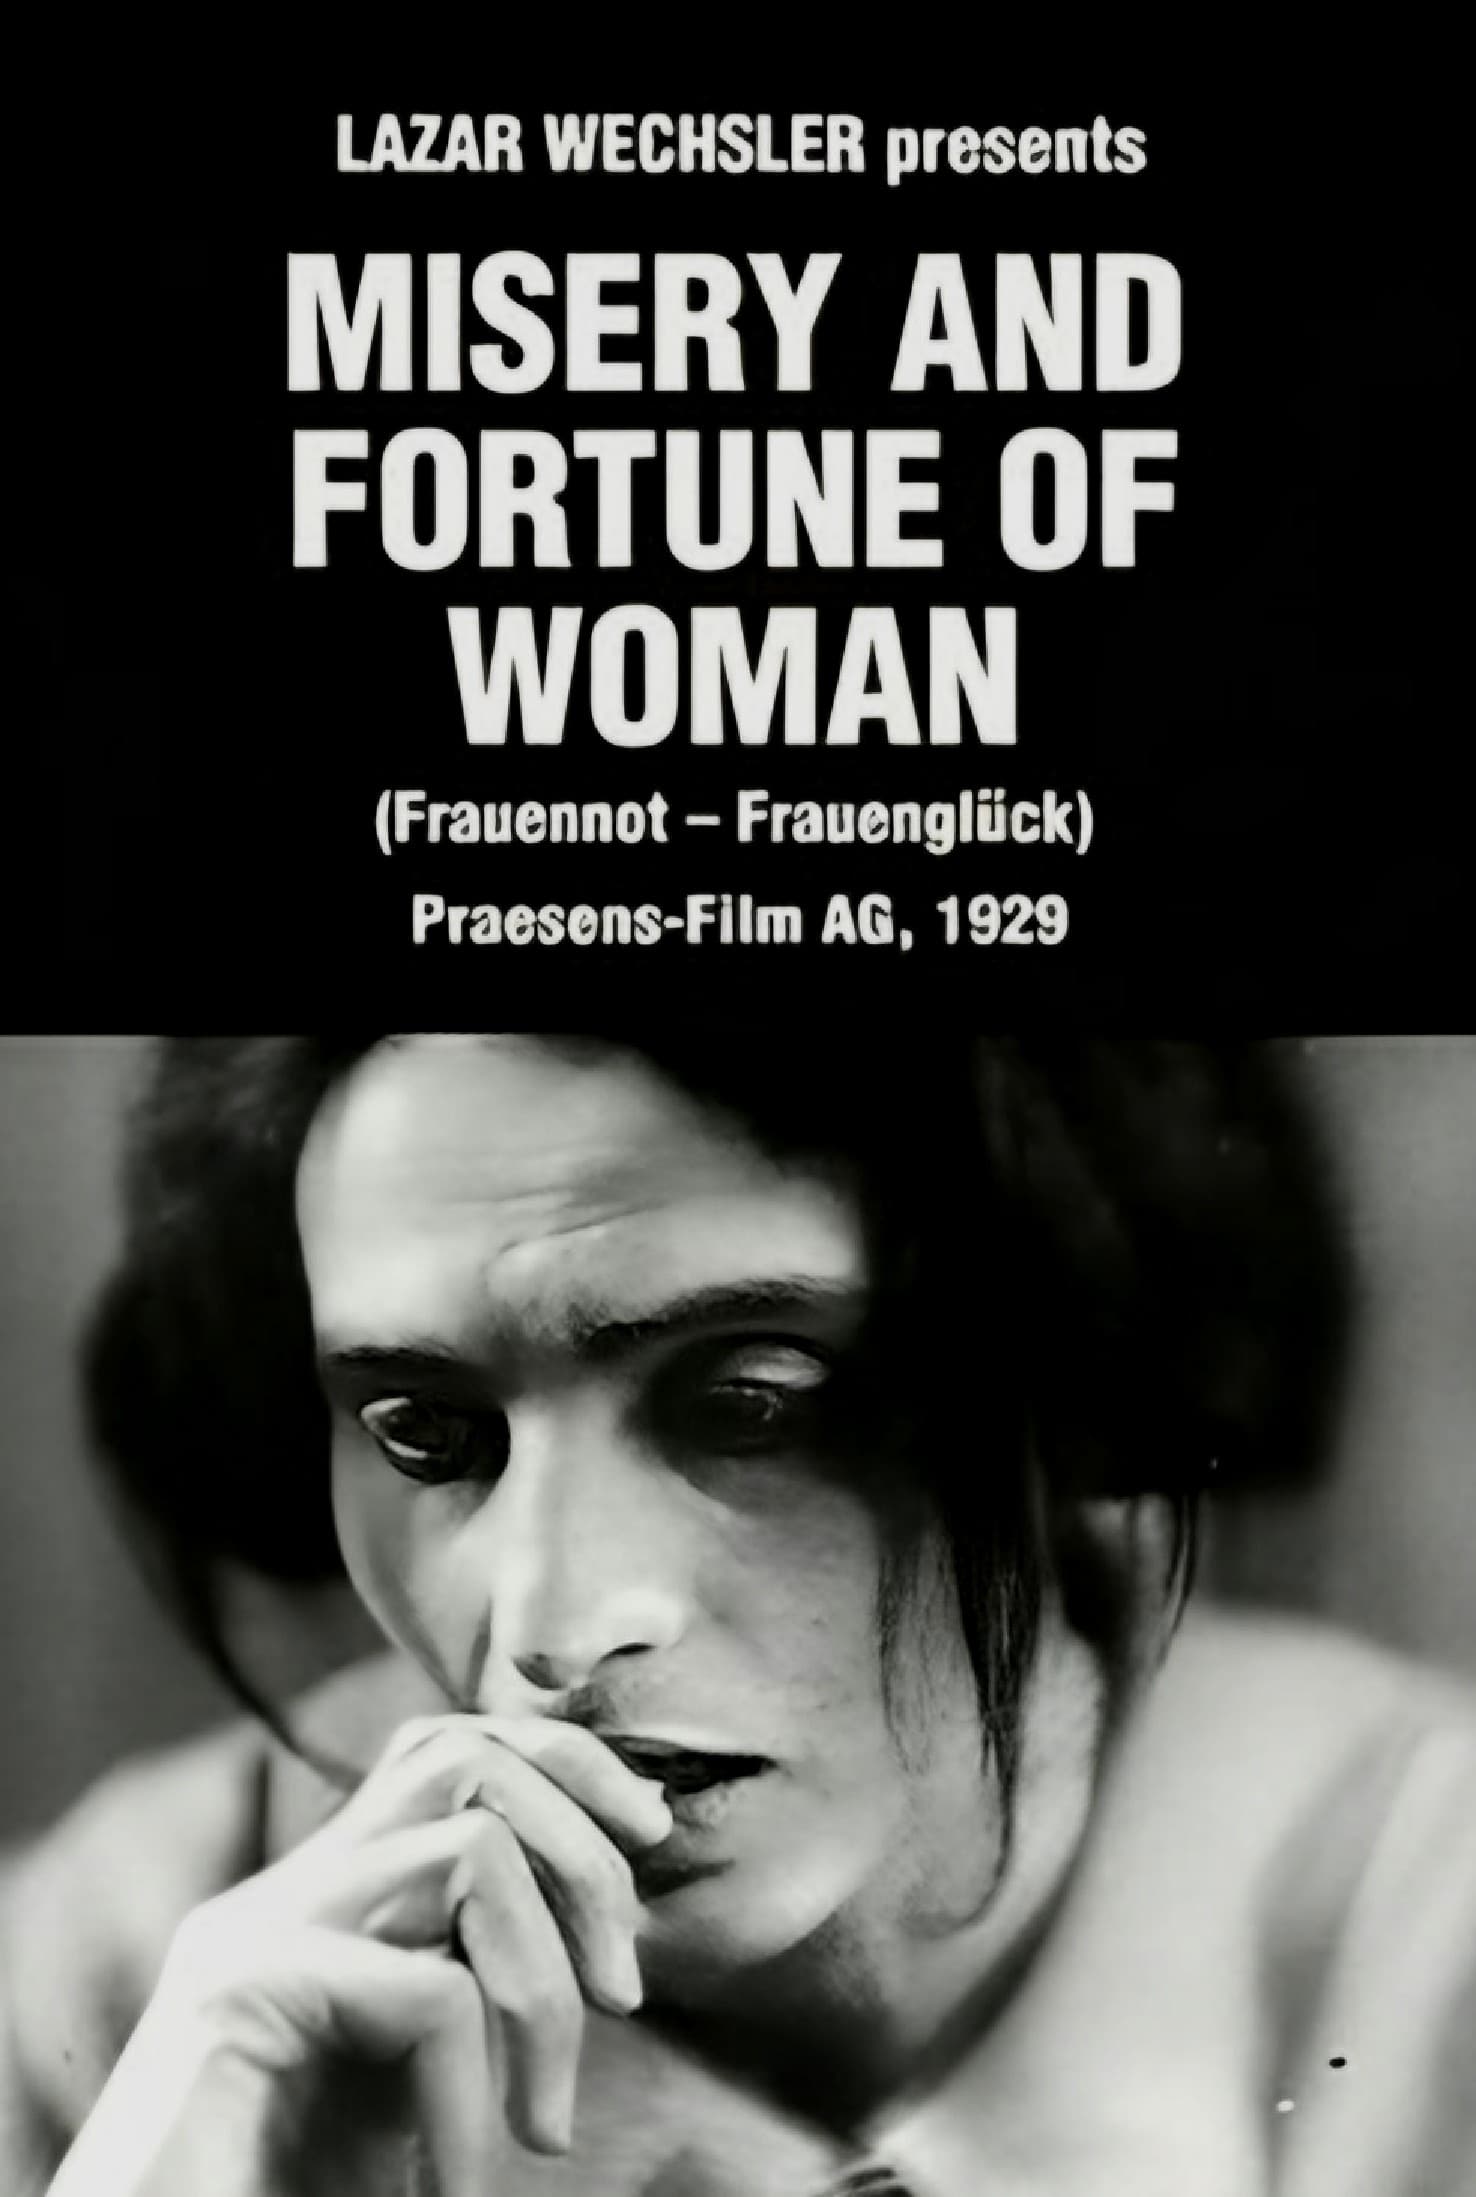 Misery and Fortune of Woman